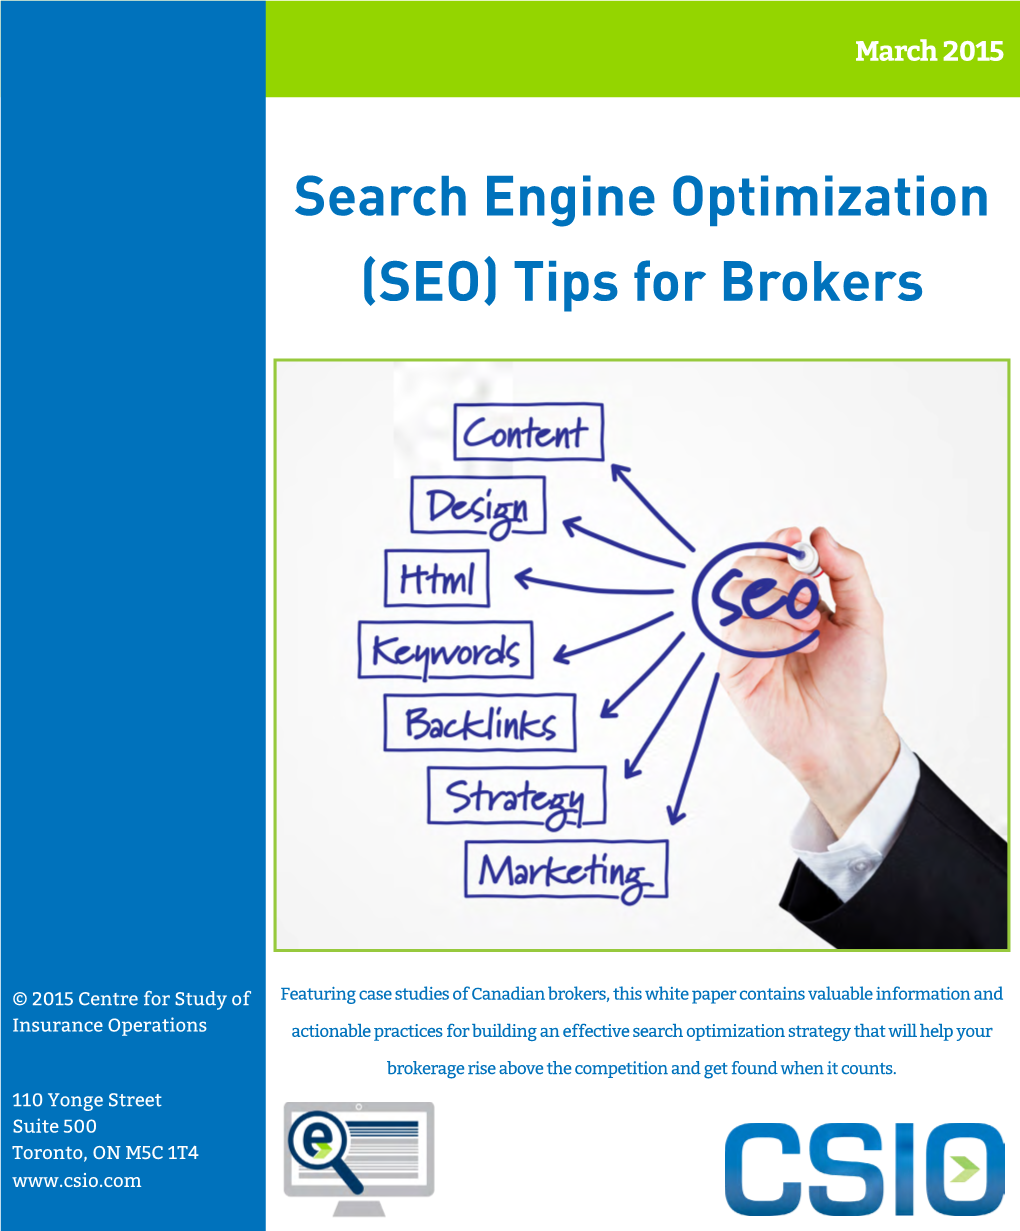 Search Engine Optimization (SEO) Tips for Brokers